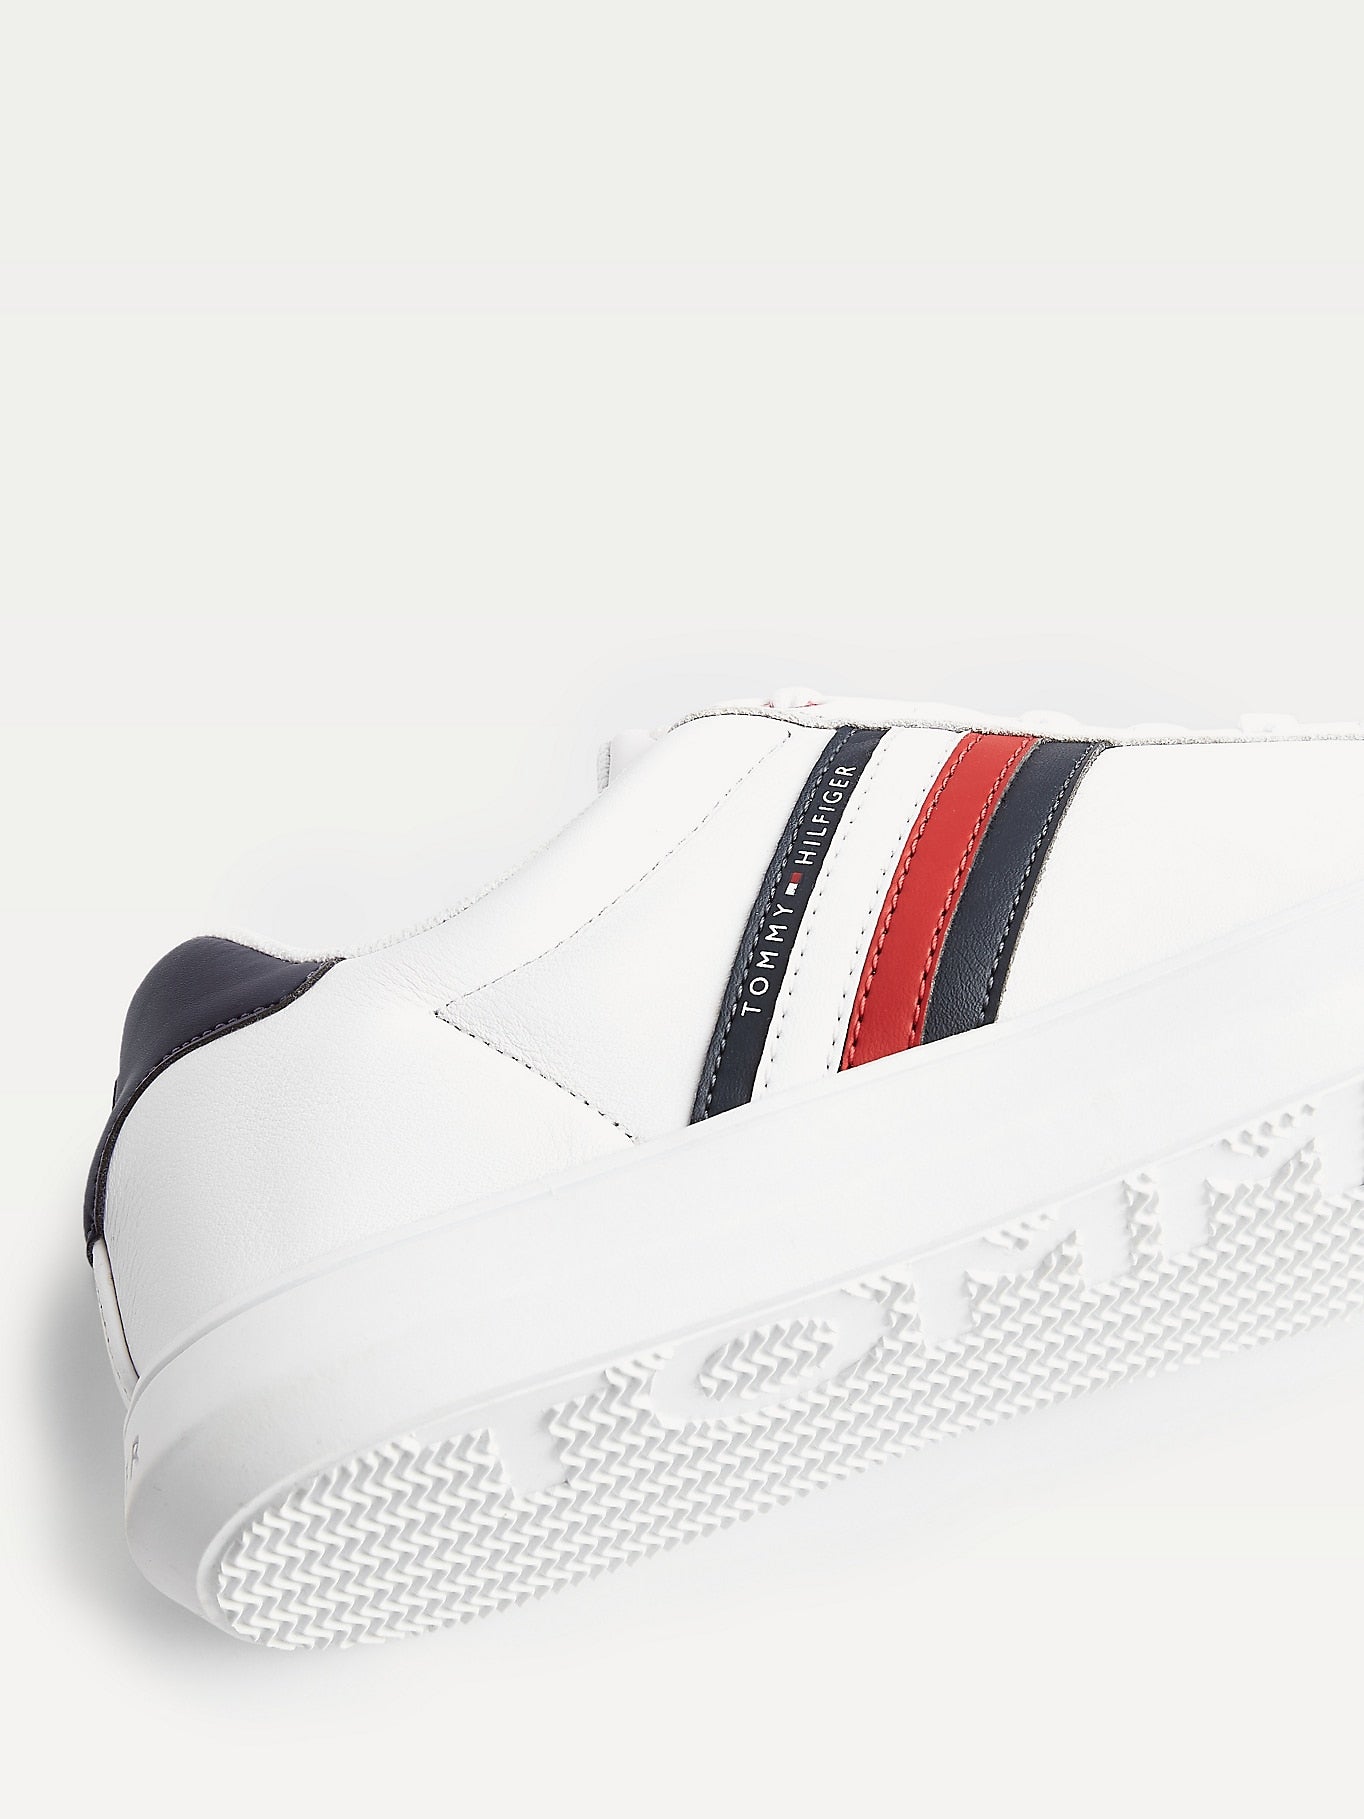 mens trainers tommy hilfiger